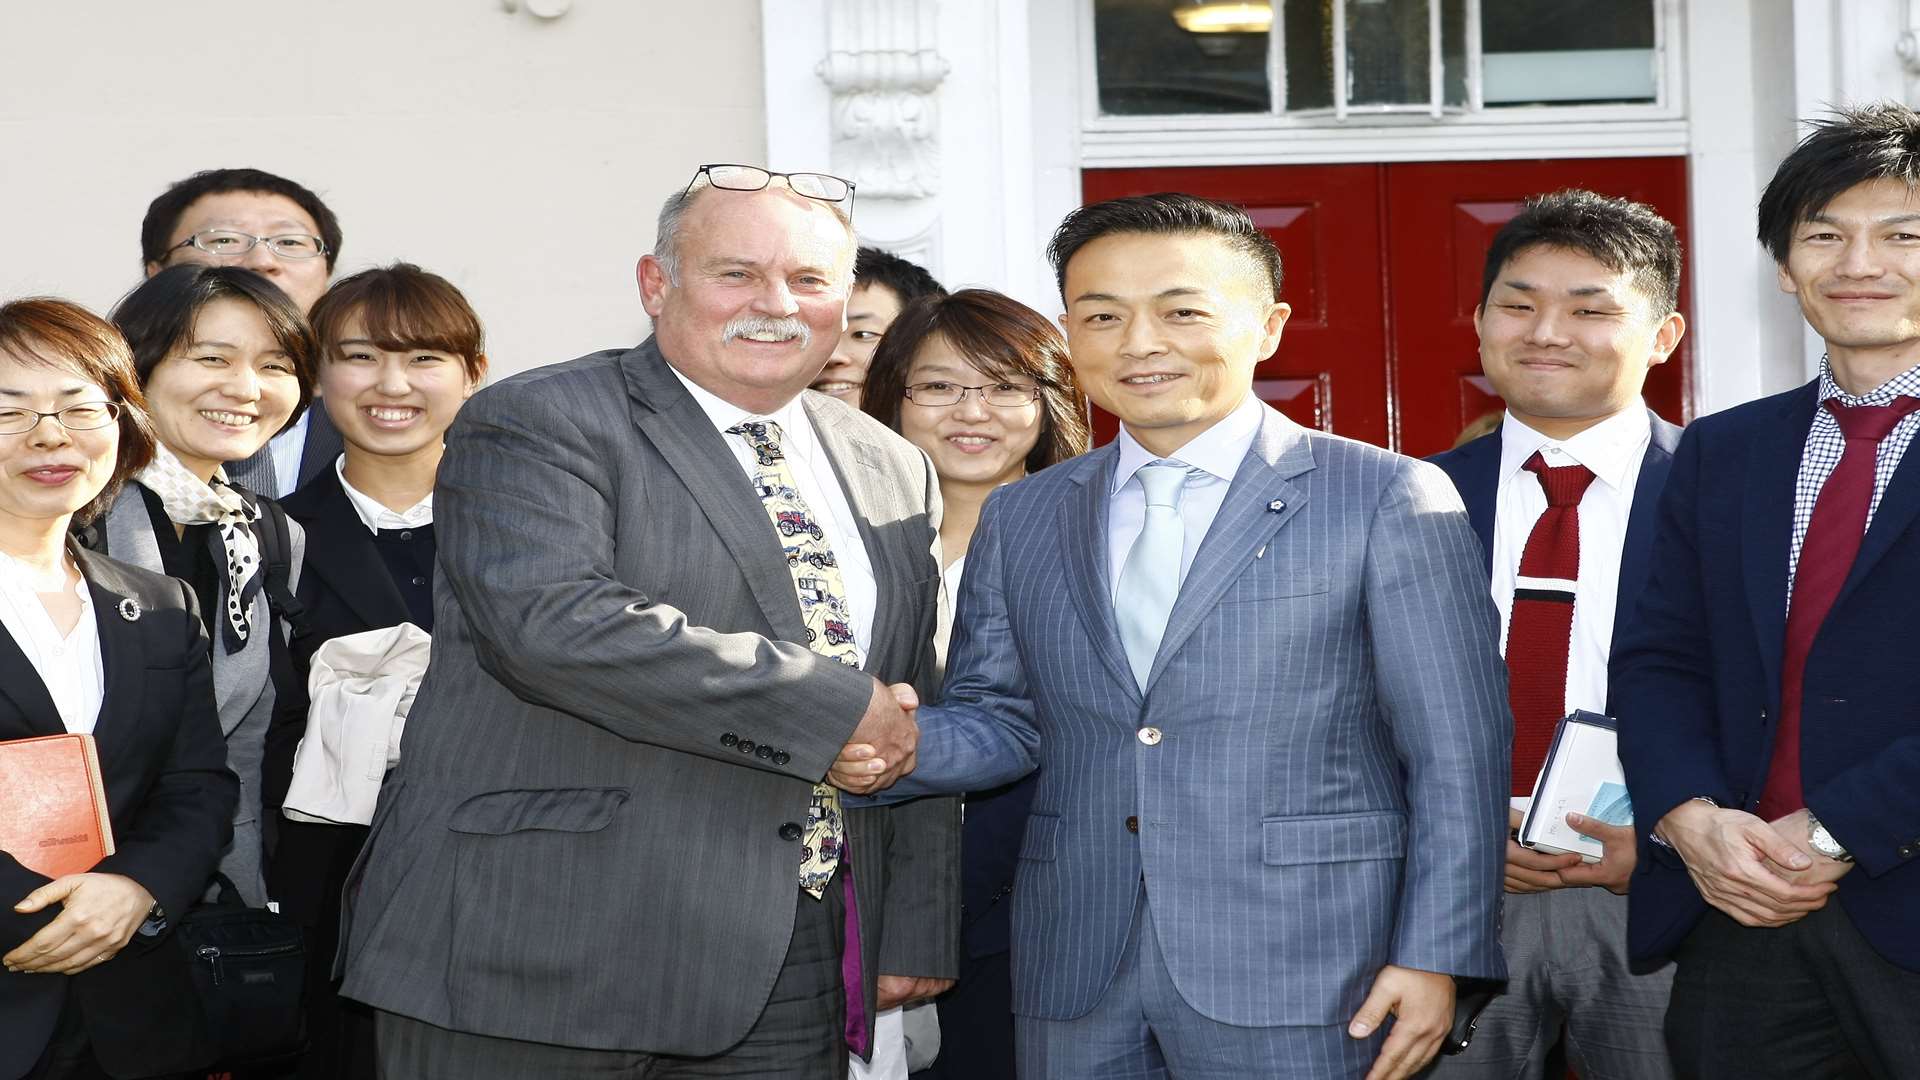 Ripplevale principal Ted Schofield and President of TASUC Saito Ukai have formed a friendship